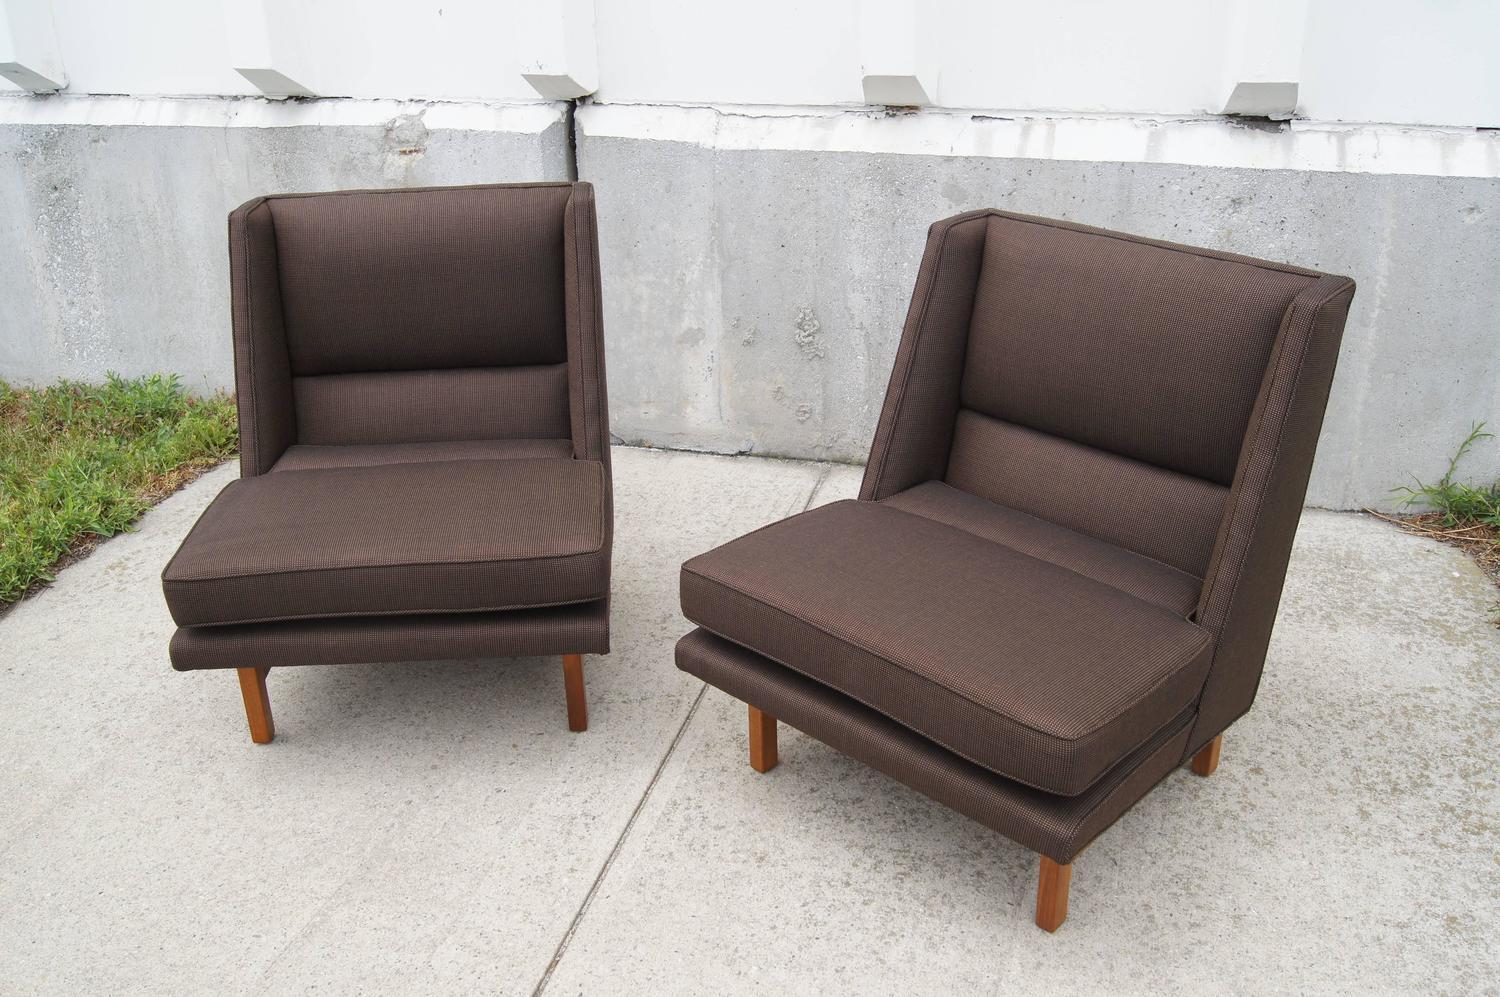 Edward Wormley designed these clean-lined slipper chairs, model # 5938, for Dunbar's New Career Collection. A sloping back rises from low, wide seats that angle up from the mahogany base. 

These rare chairs have been reupholstered in Knoll's